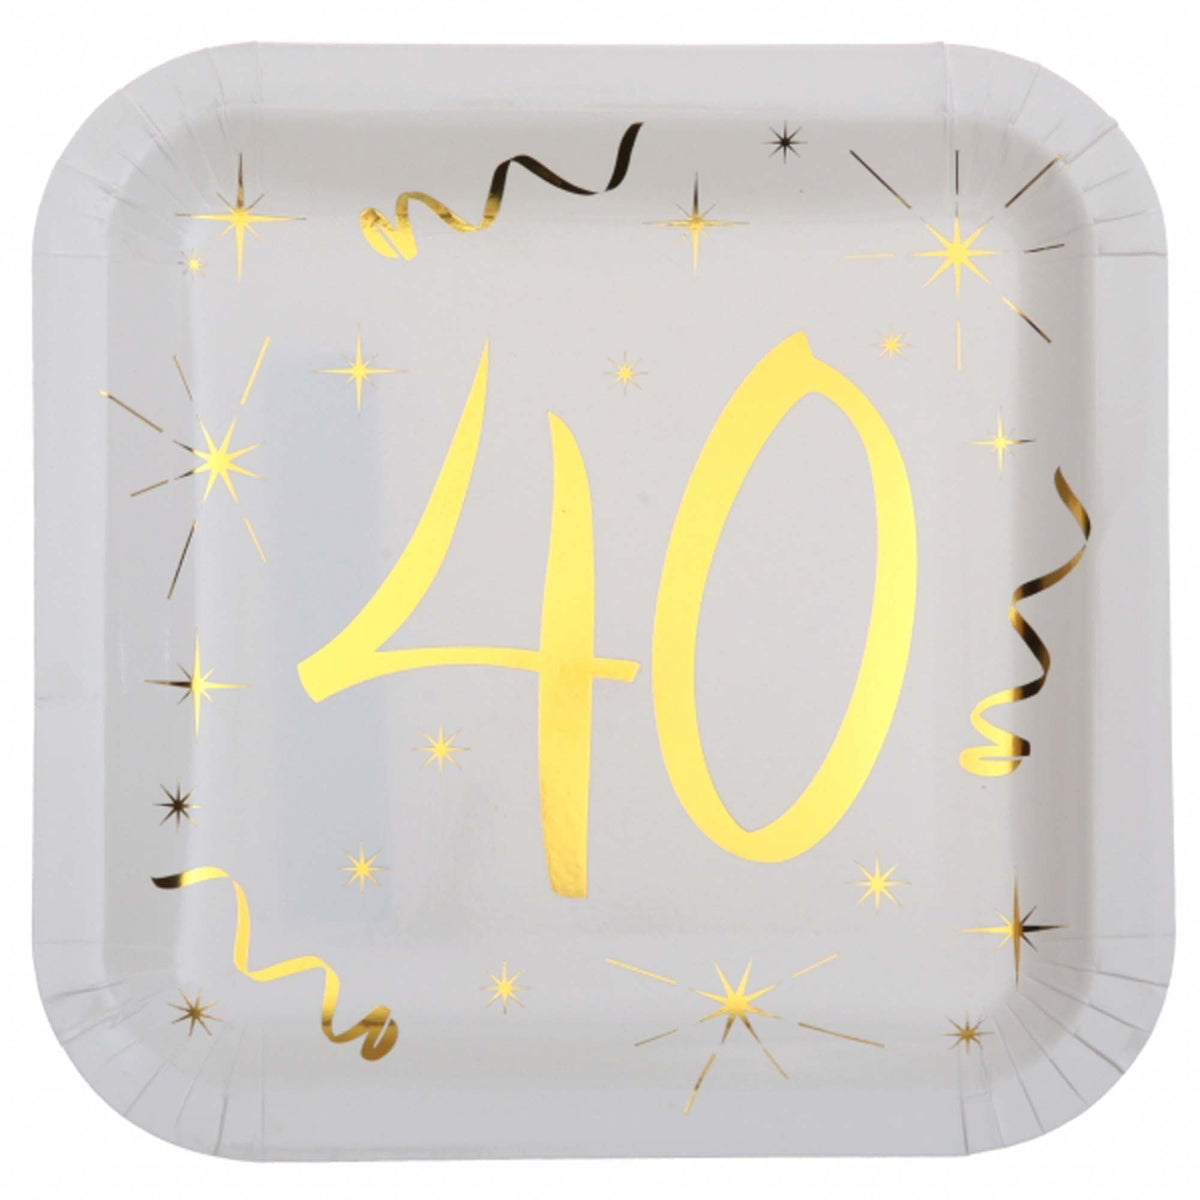 SANTEX General Birthday Starry Golden Age 40th Birthday Large Square Lunch Paper Plates, 9 Inches, 10 Count 3660380040408